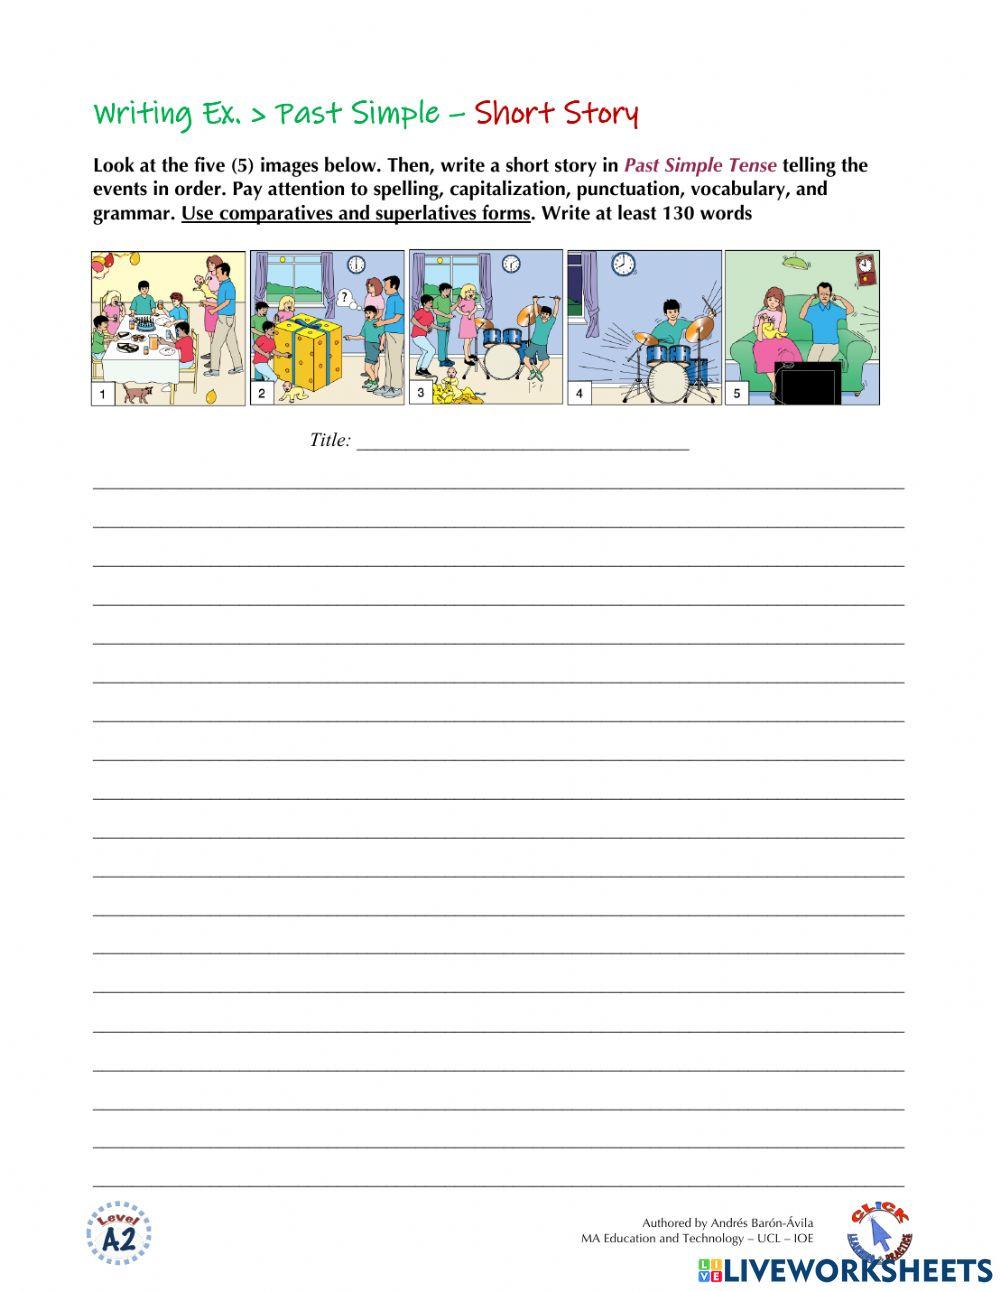 Writing Ex. - Short Story 1 in Past Simple worksheet | Live Worksheets